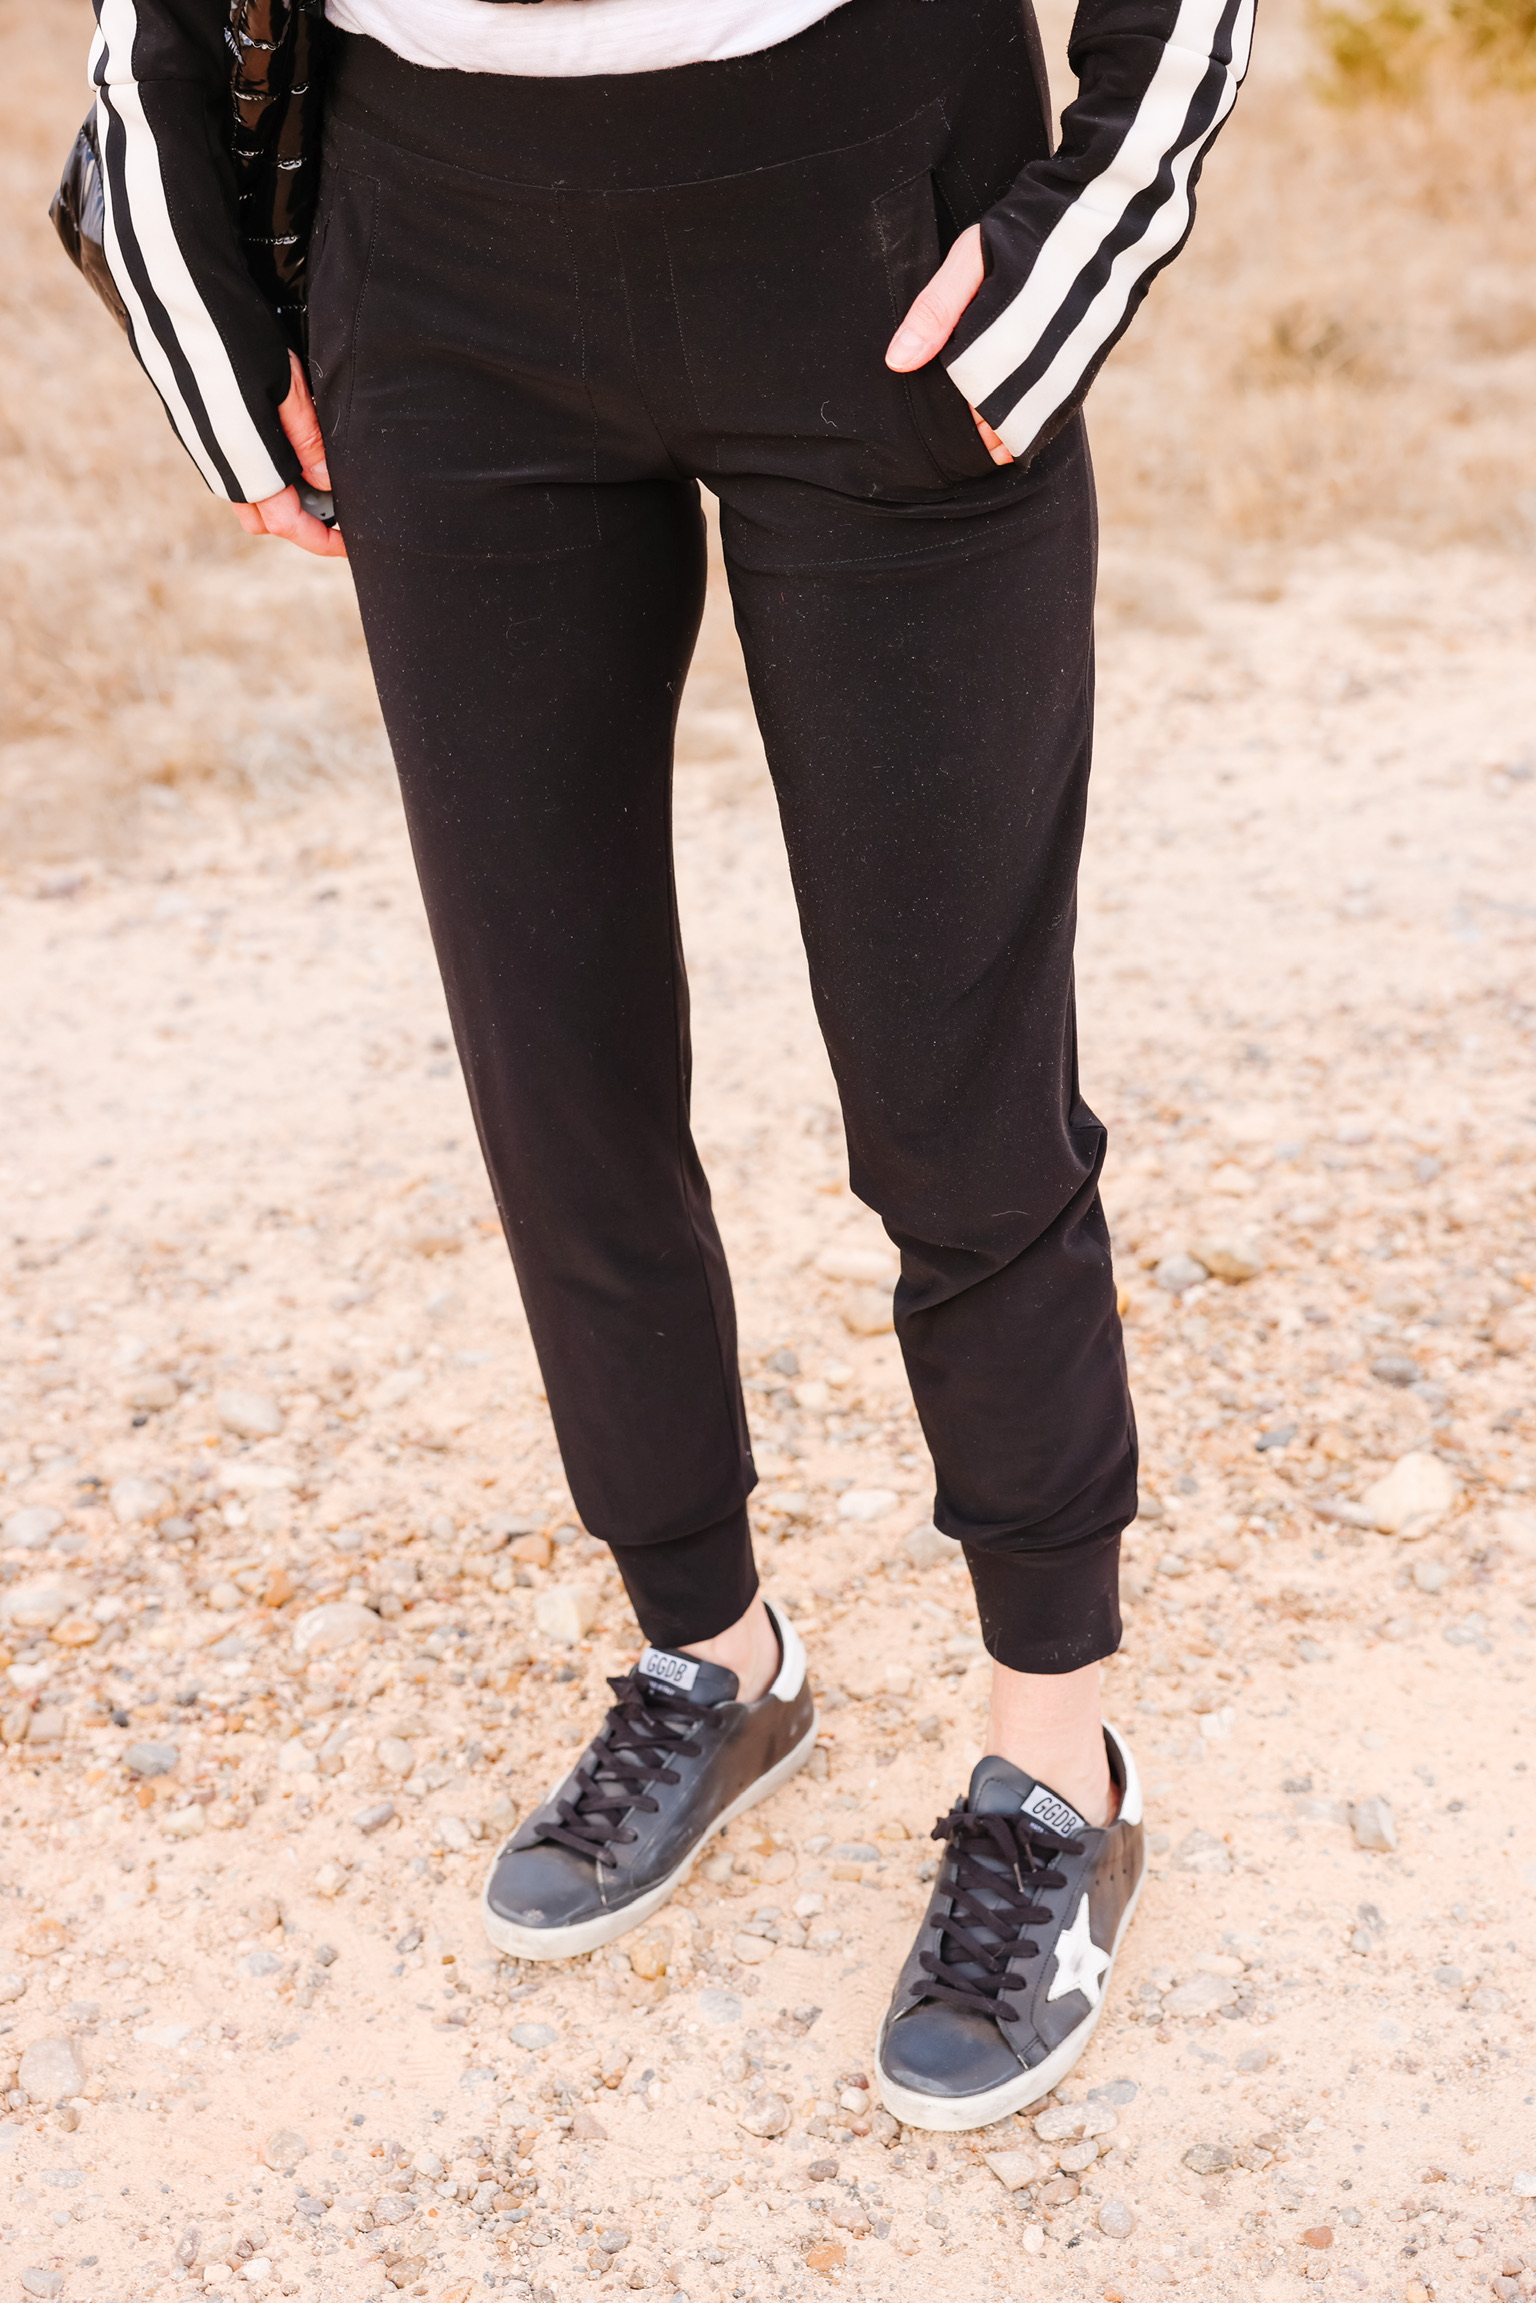 Cozy Loungewear, Erin Busbee of Busbee wearing a black striped Norma Kamali jacket with black norma kamali joggers and black golden goose sneakers carrying a think royln tote in South Texas, Elevated Basics, affordable activewear for women, Erin Busbee of Busbee wearing black golden goose sneakers with black joggers by Norma Kamali in south texas